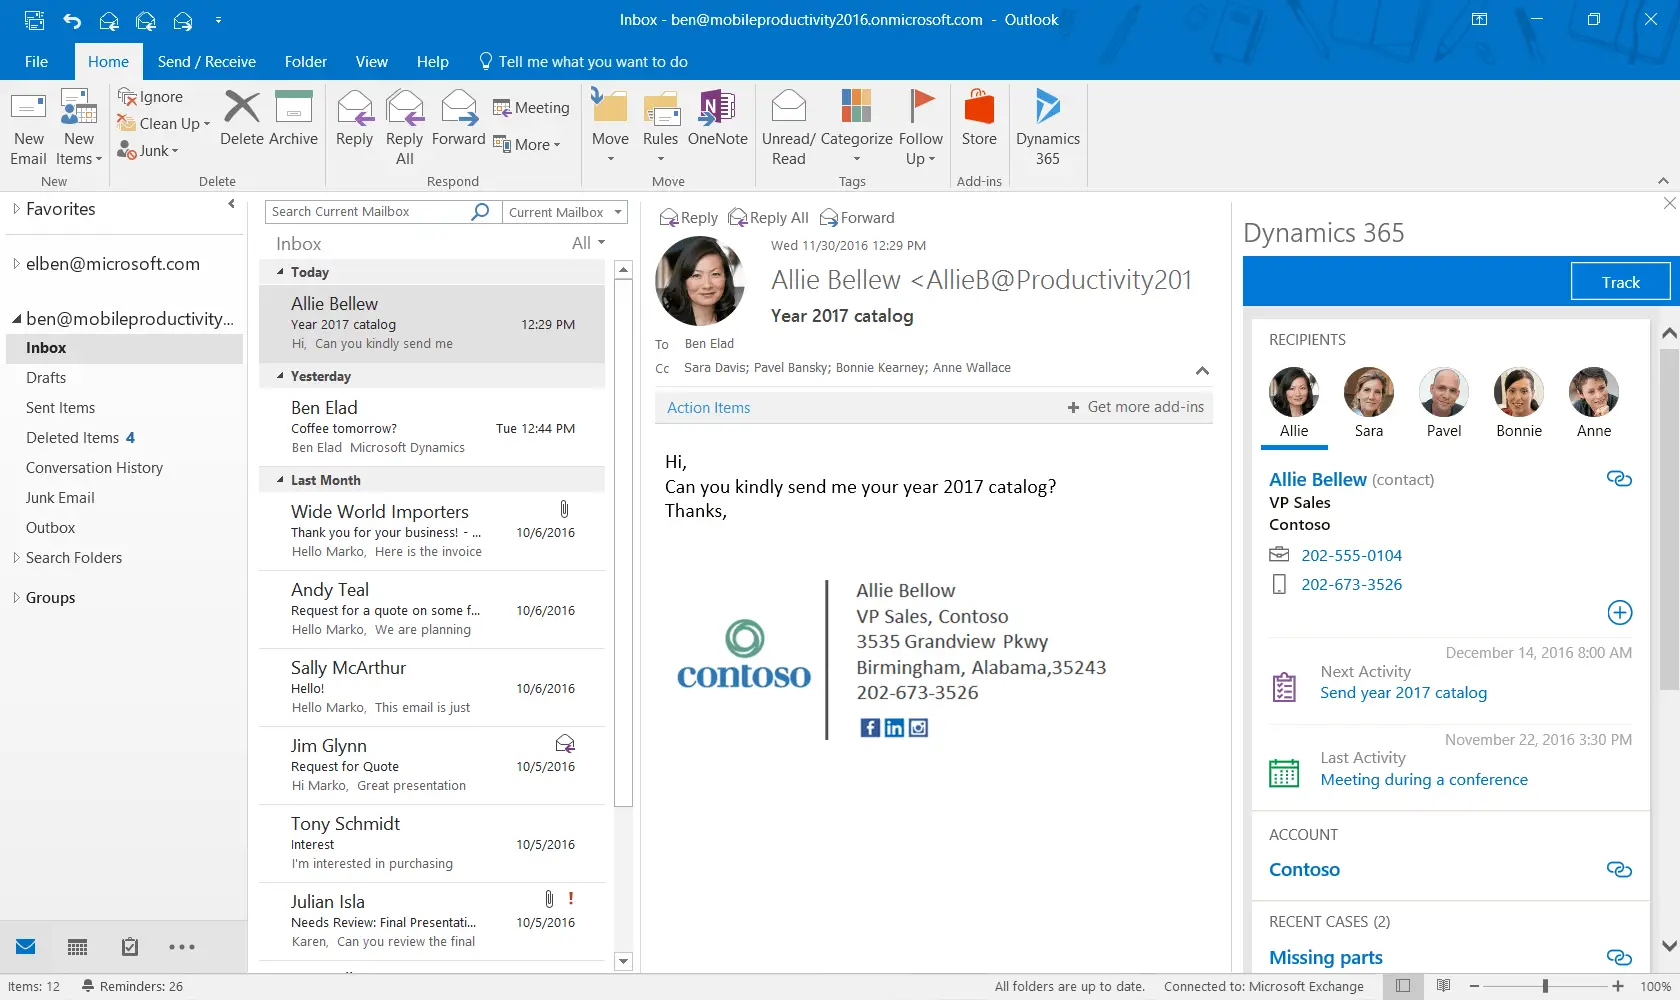 ms office outlook free download